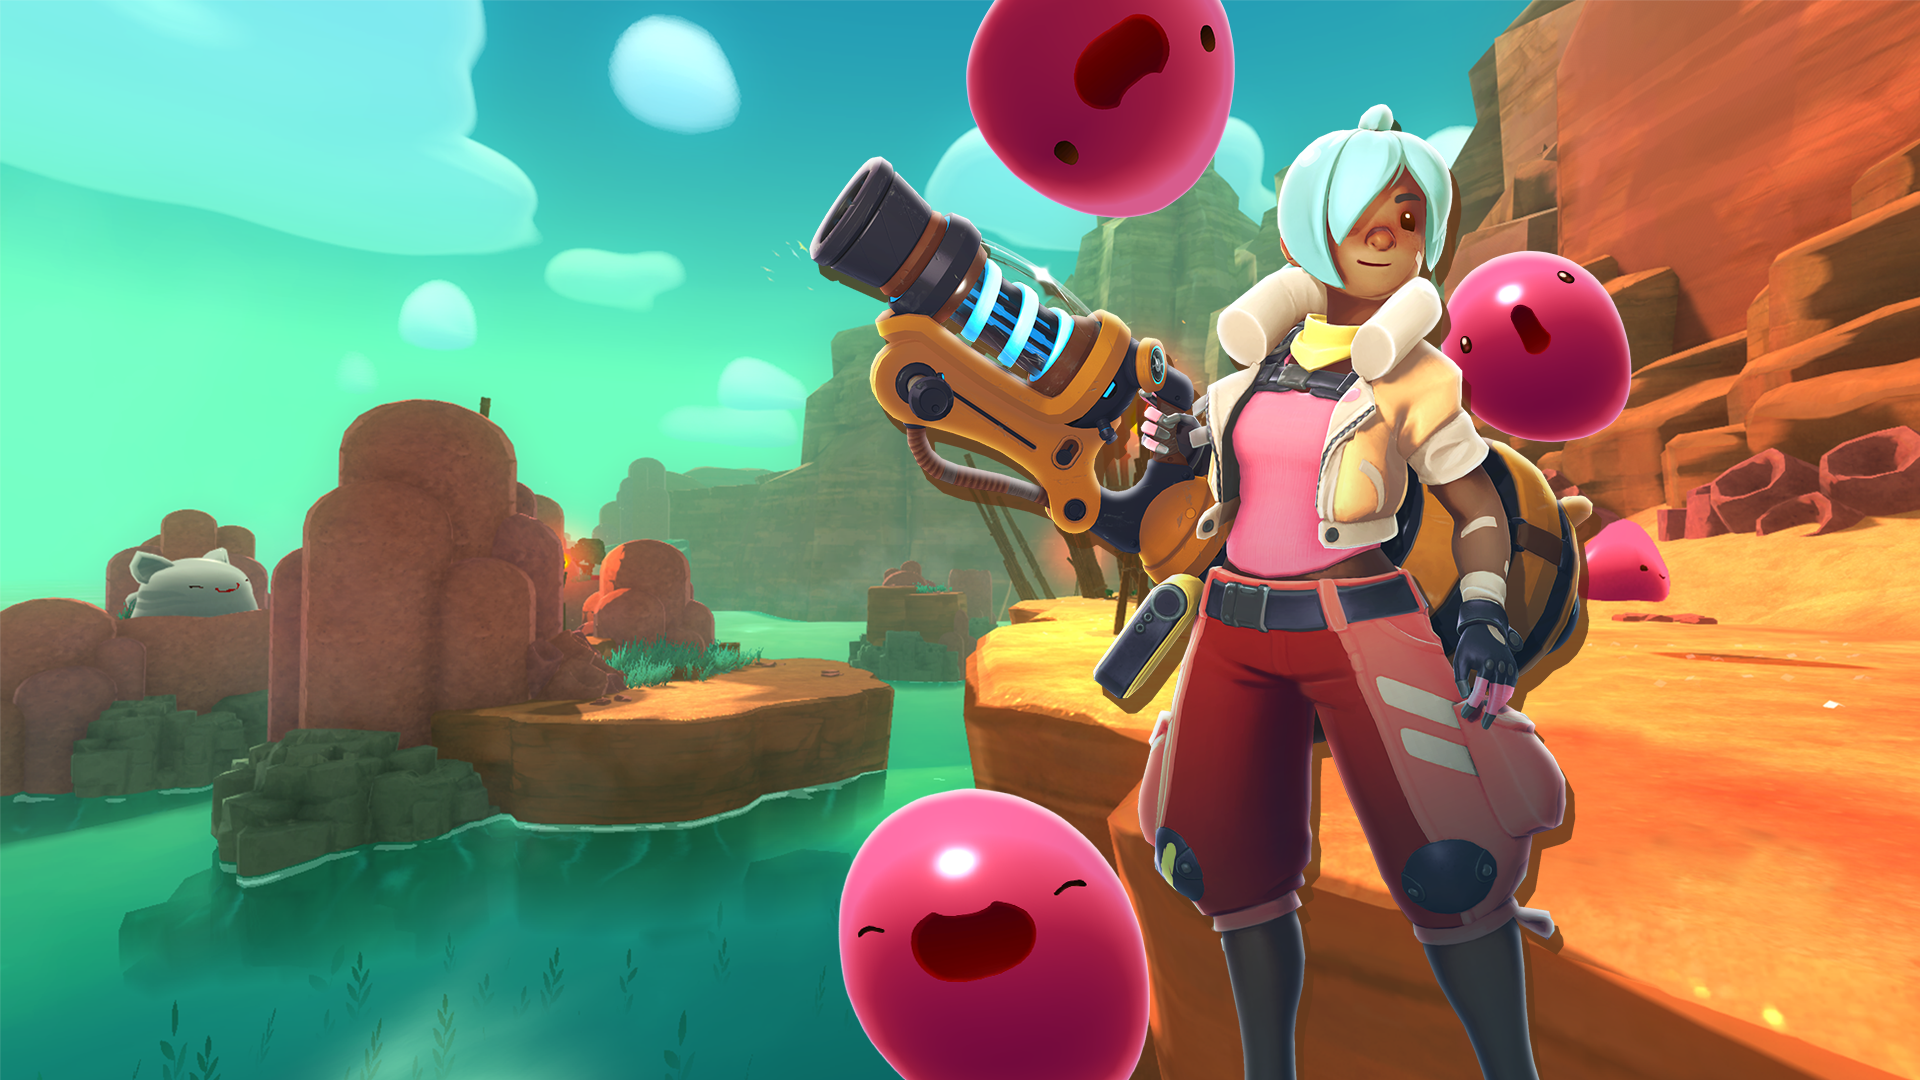 the slime rancher game